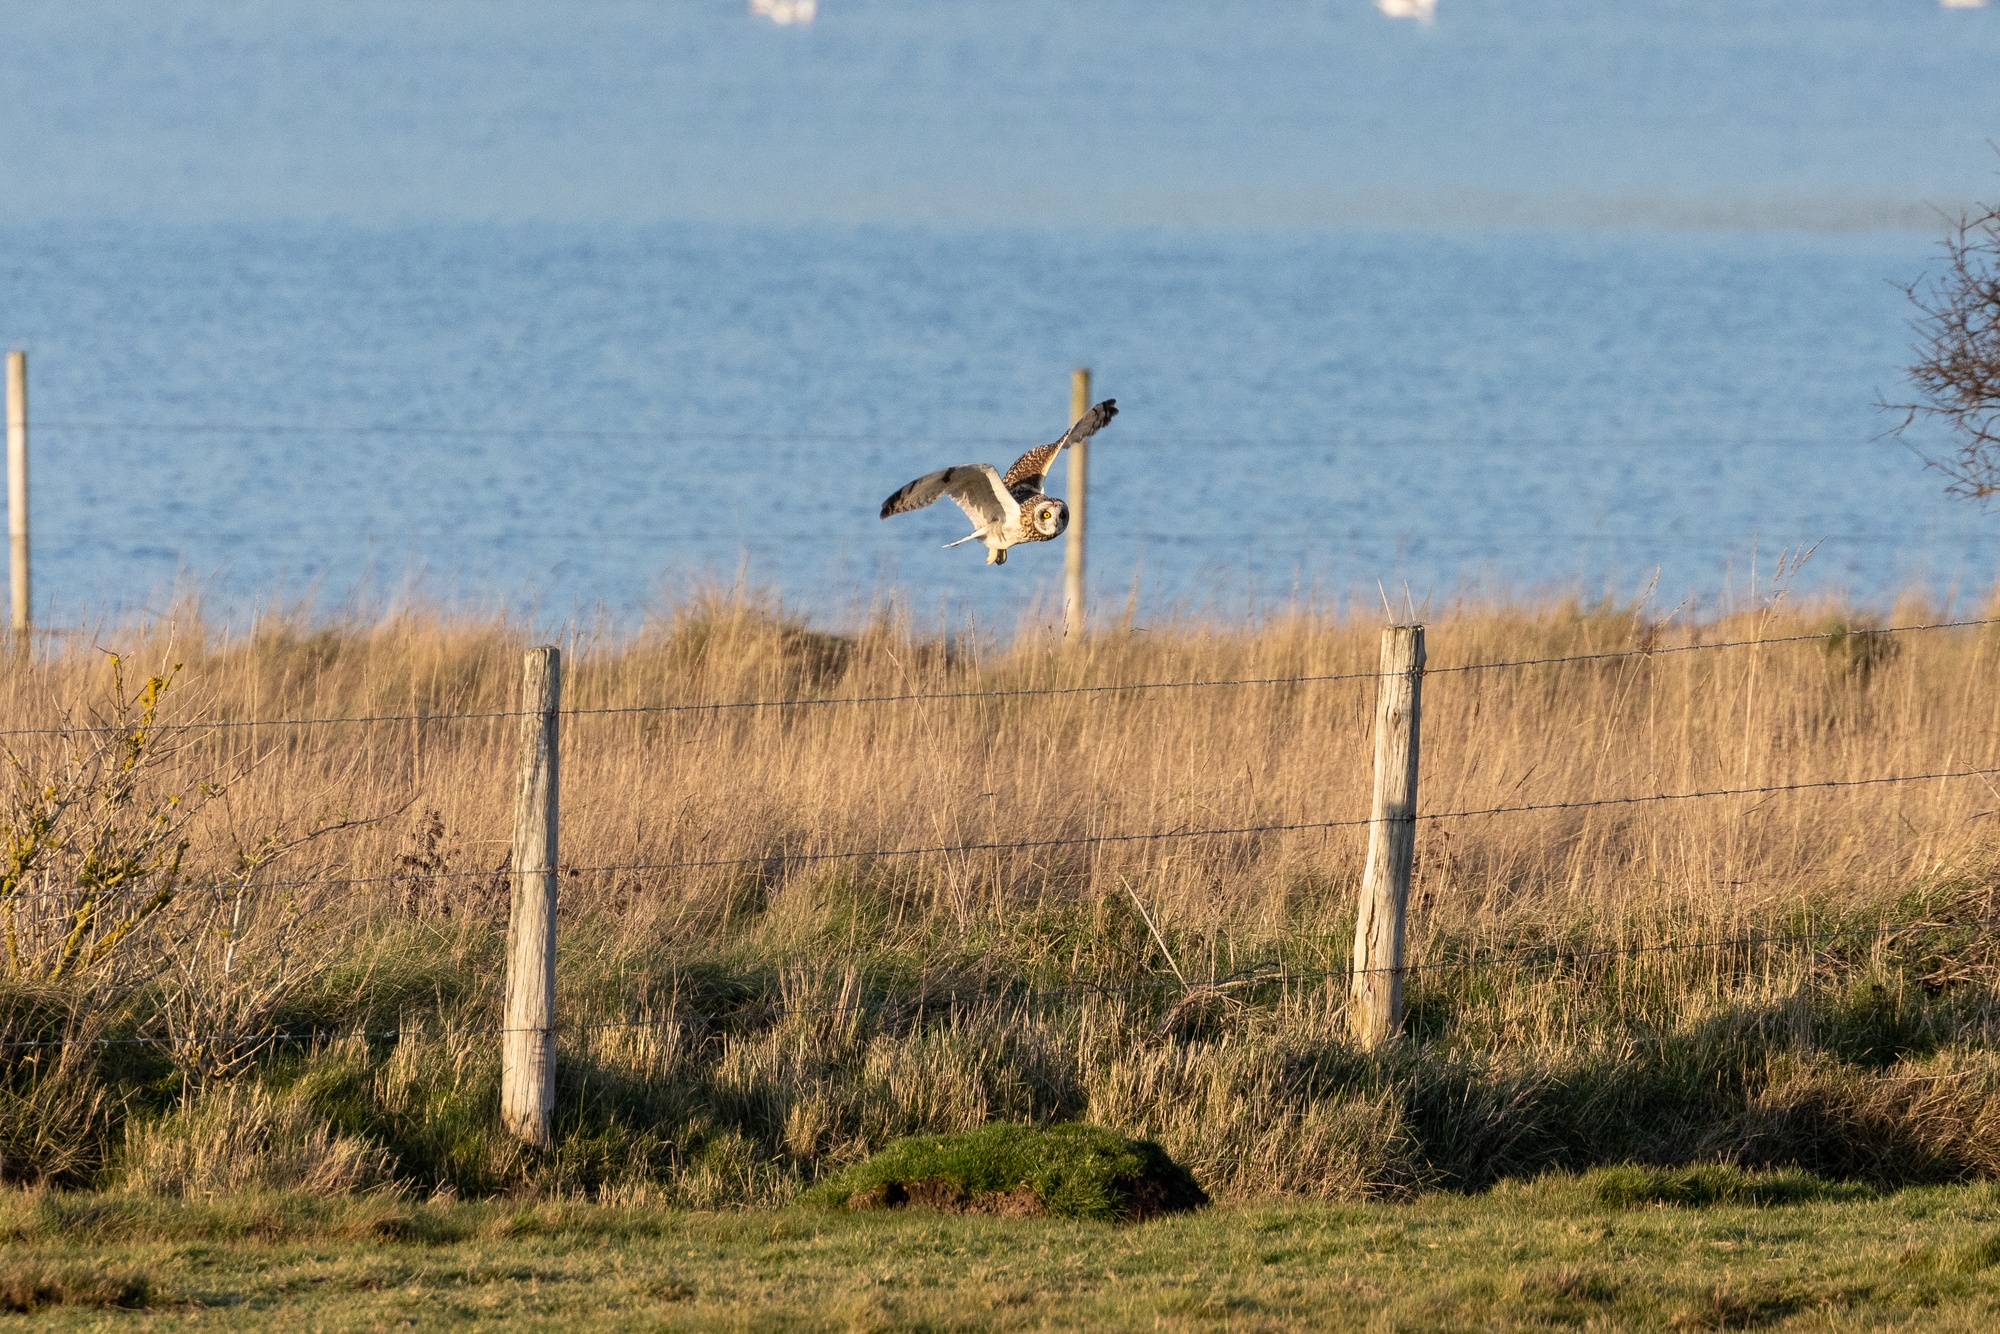 Short-eared owl flying from left to right with wings above its head. The wings are bent at so that the ends of the wings are parallel with the ground. Behind the owl is a blue lake with small ripple patterns on it. The owl is silhouetted against the pond. The owl is flying over wire fences and wooden posts containing various length of shortish yellow grass.